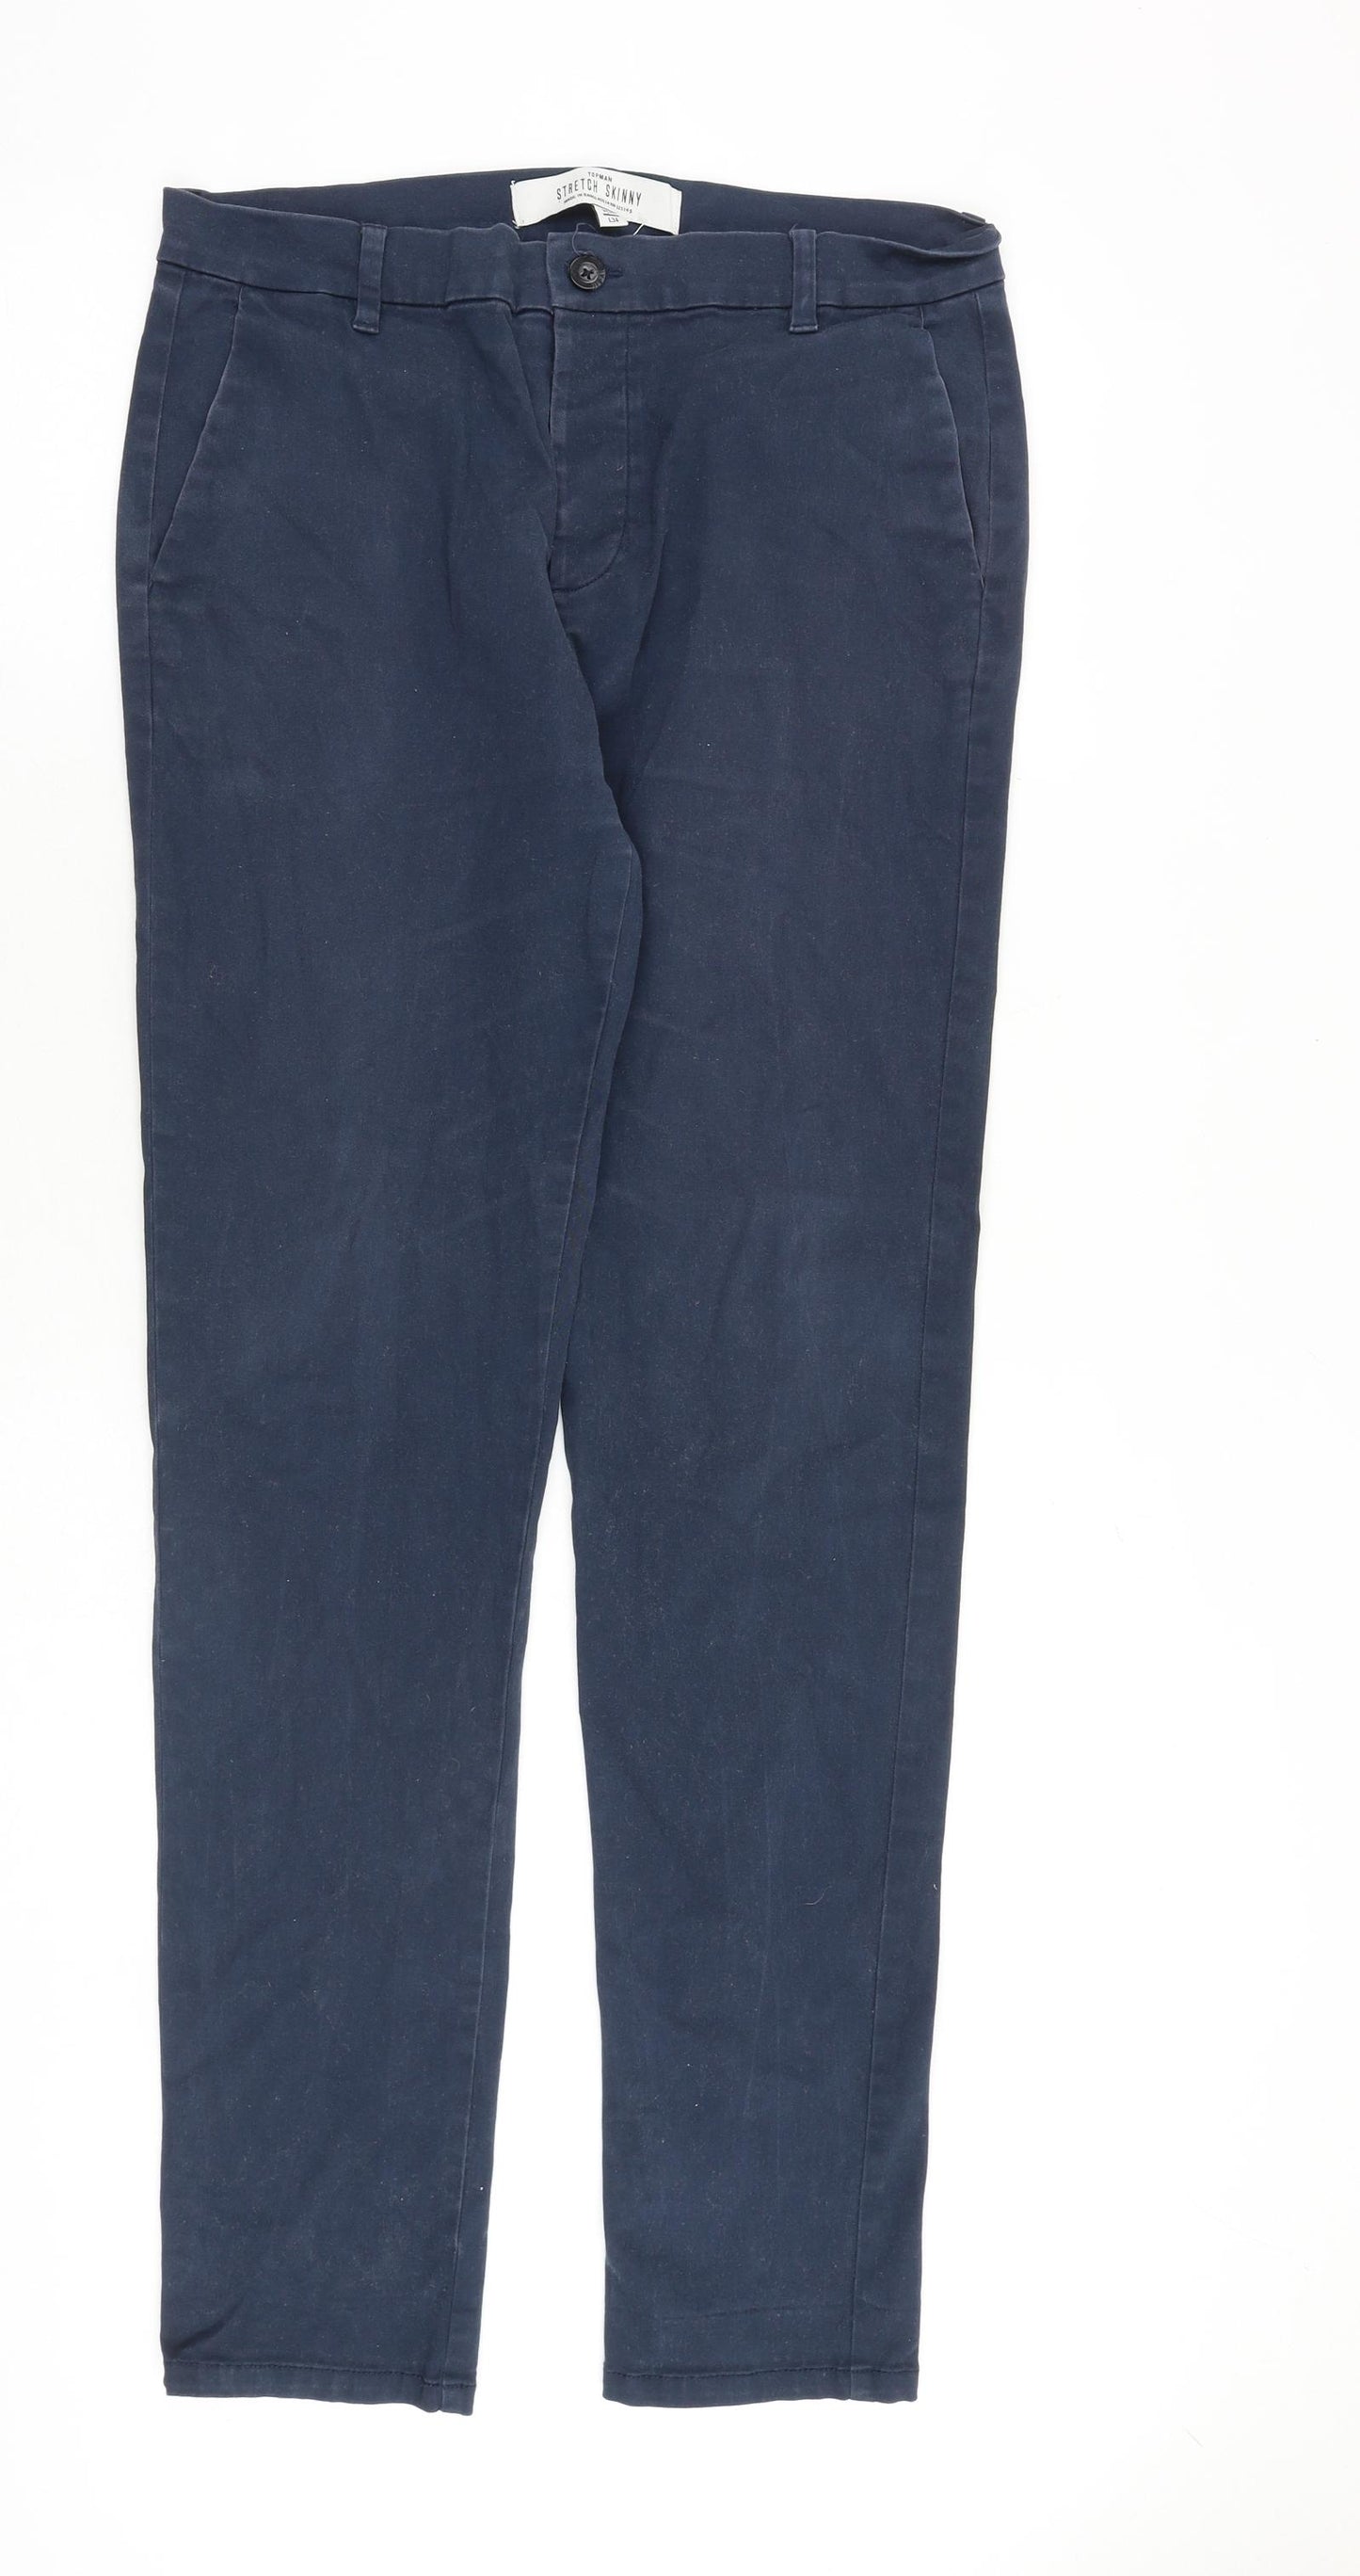 Topman Mens Blue Cotton Chino Trousers Size 34 in L34 in Regular Button